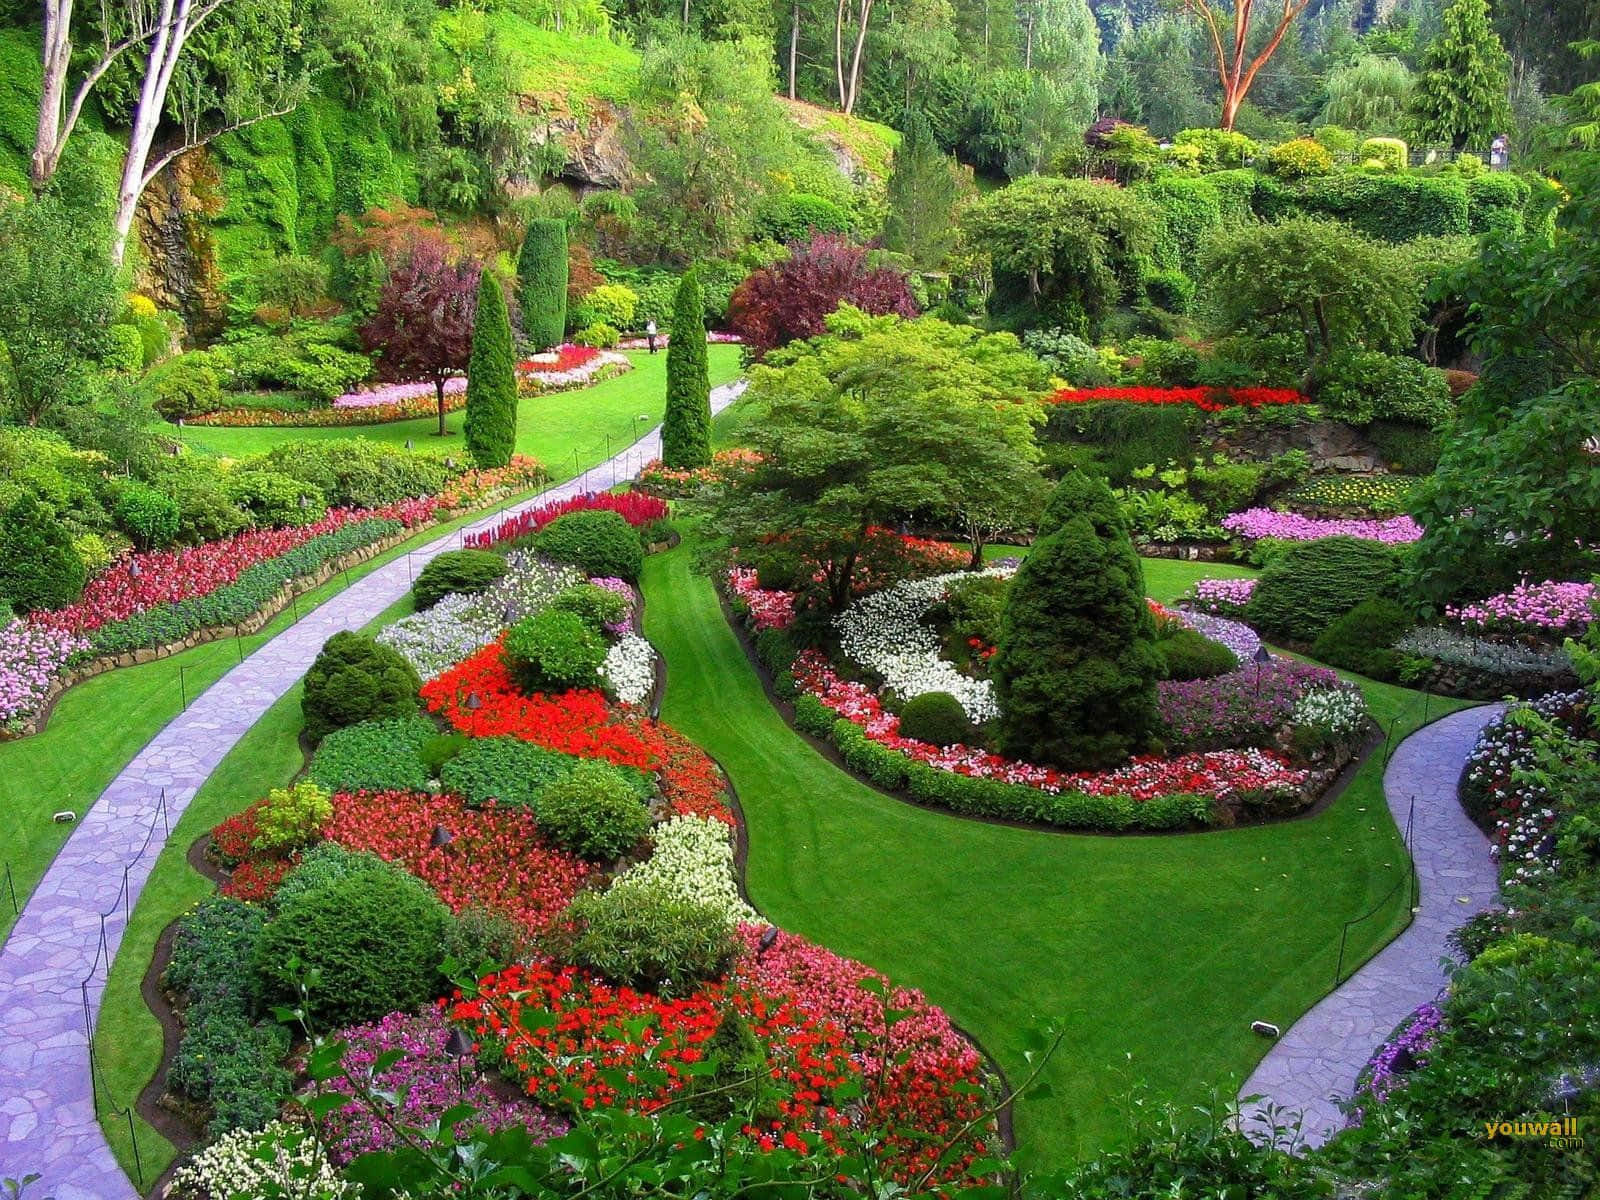 Enjoy the beauty of nature in this peaceful park